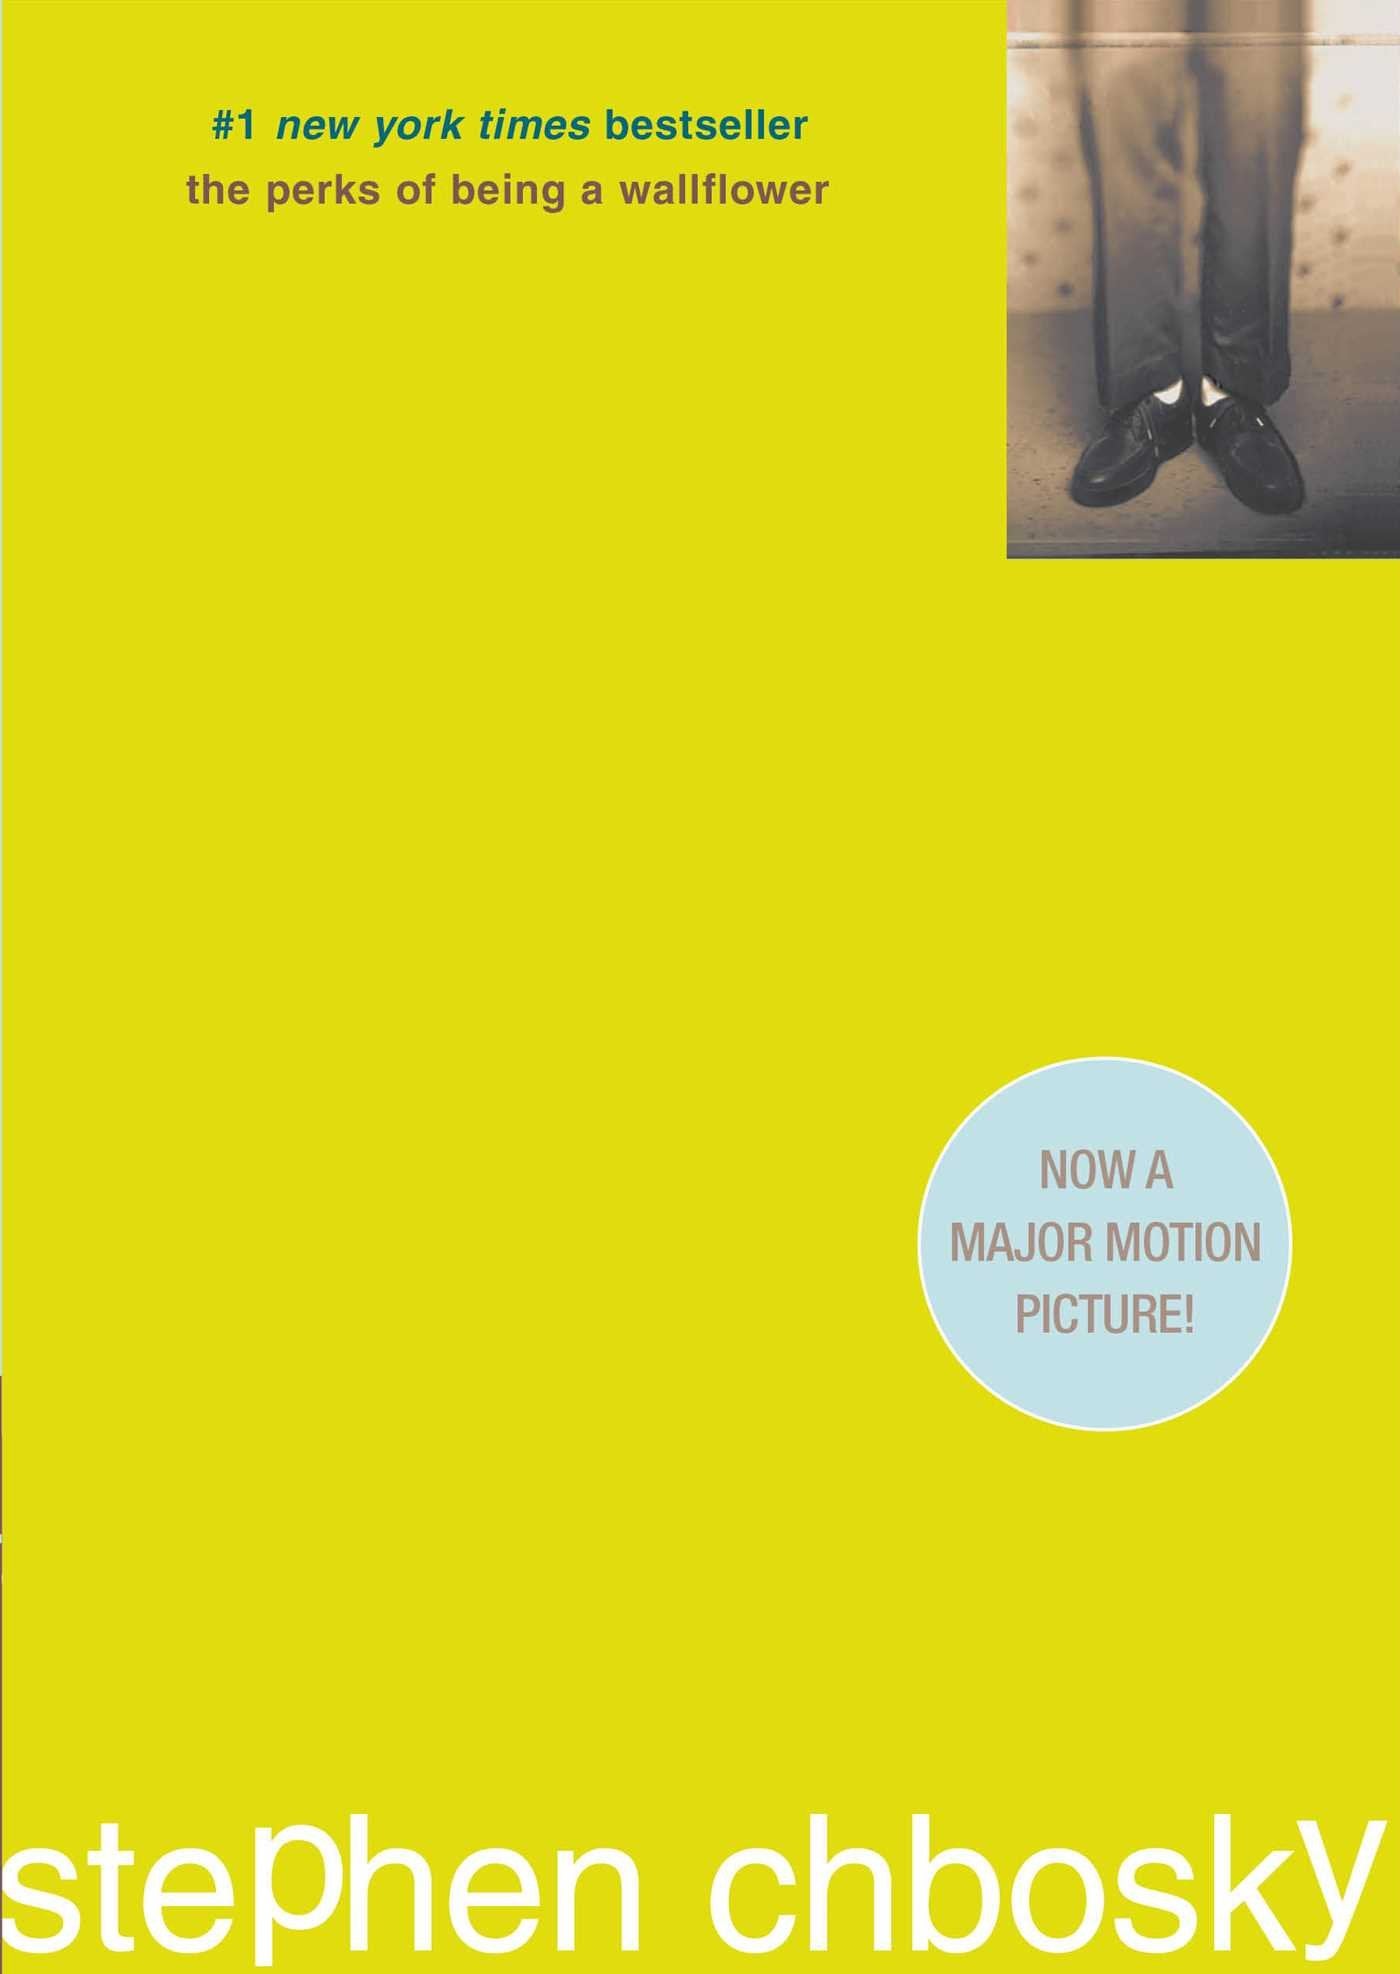 Perks of Being a Wallflower by Stephen Chbosky book cover.